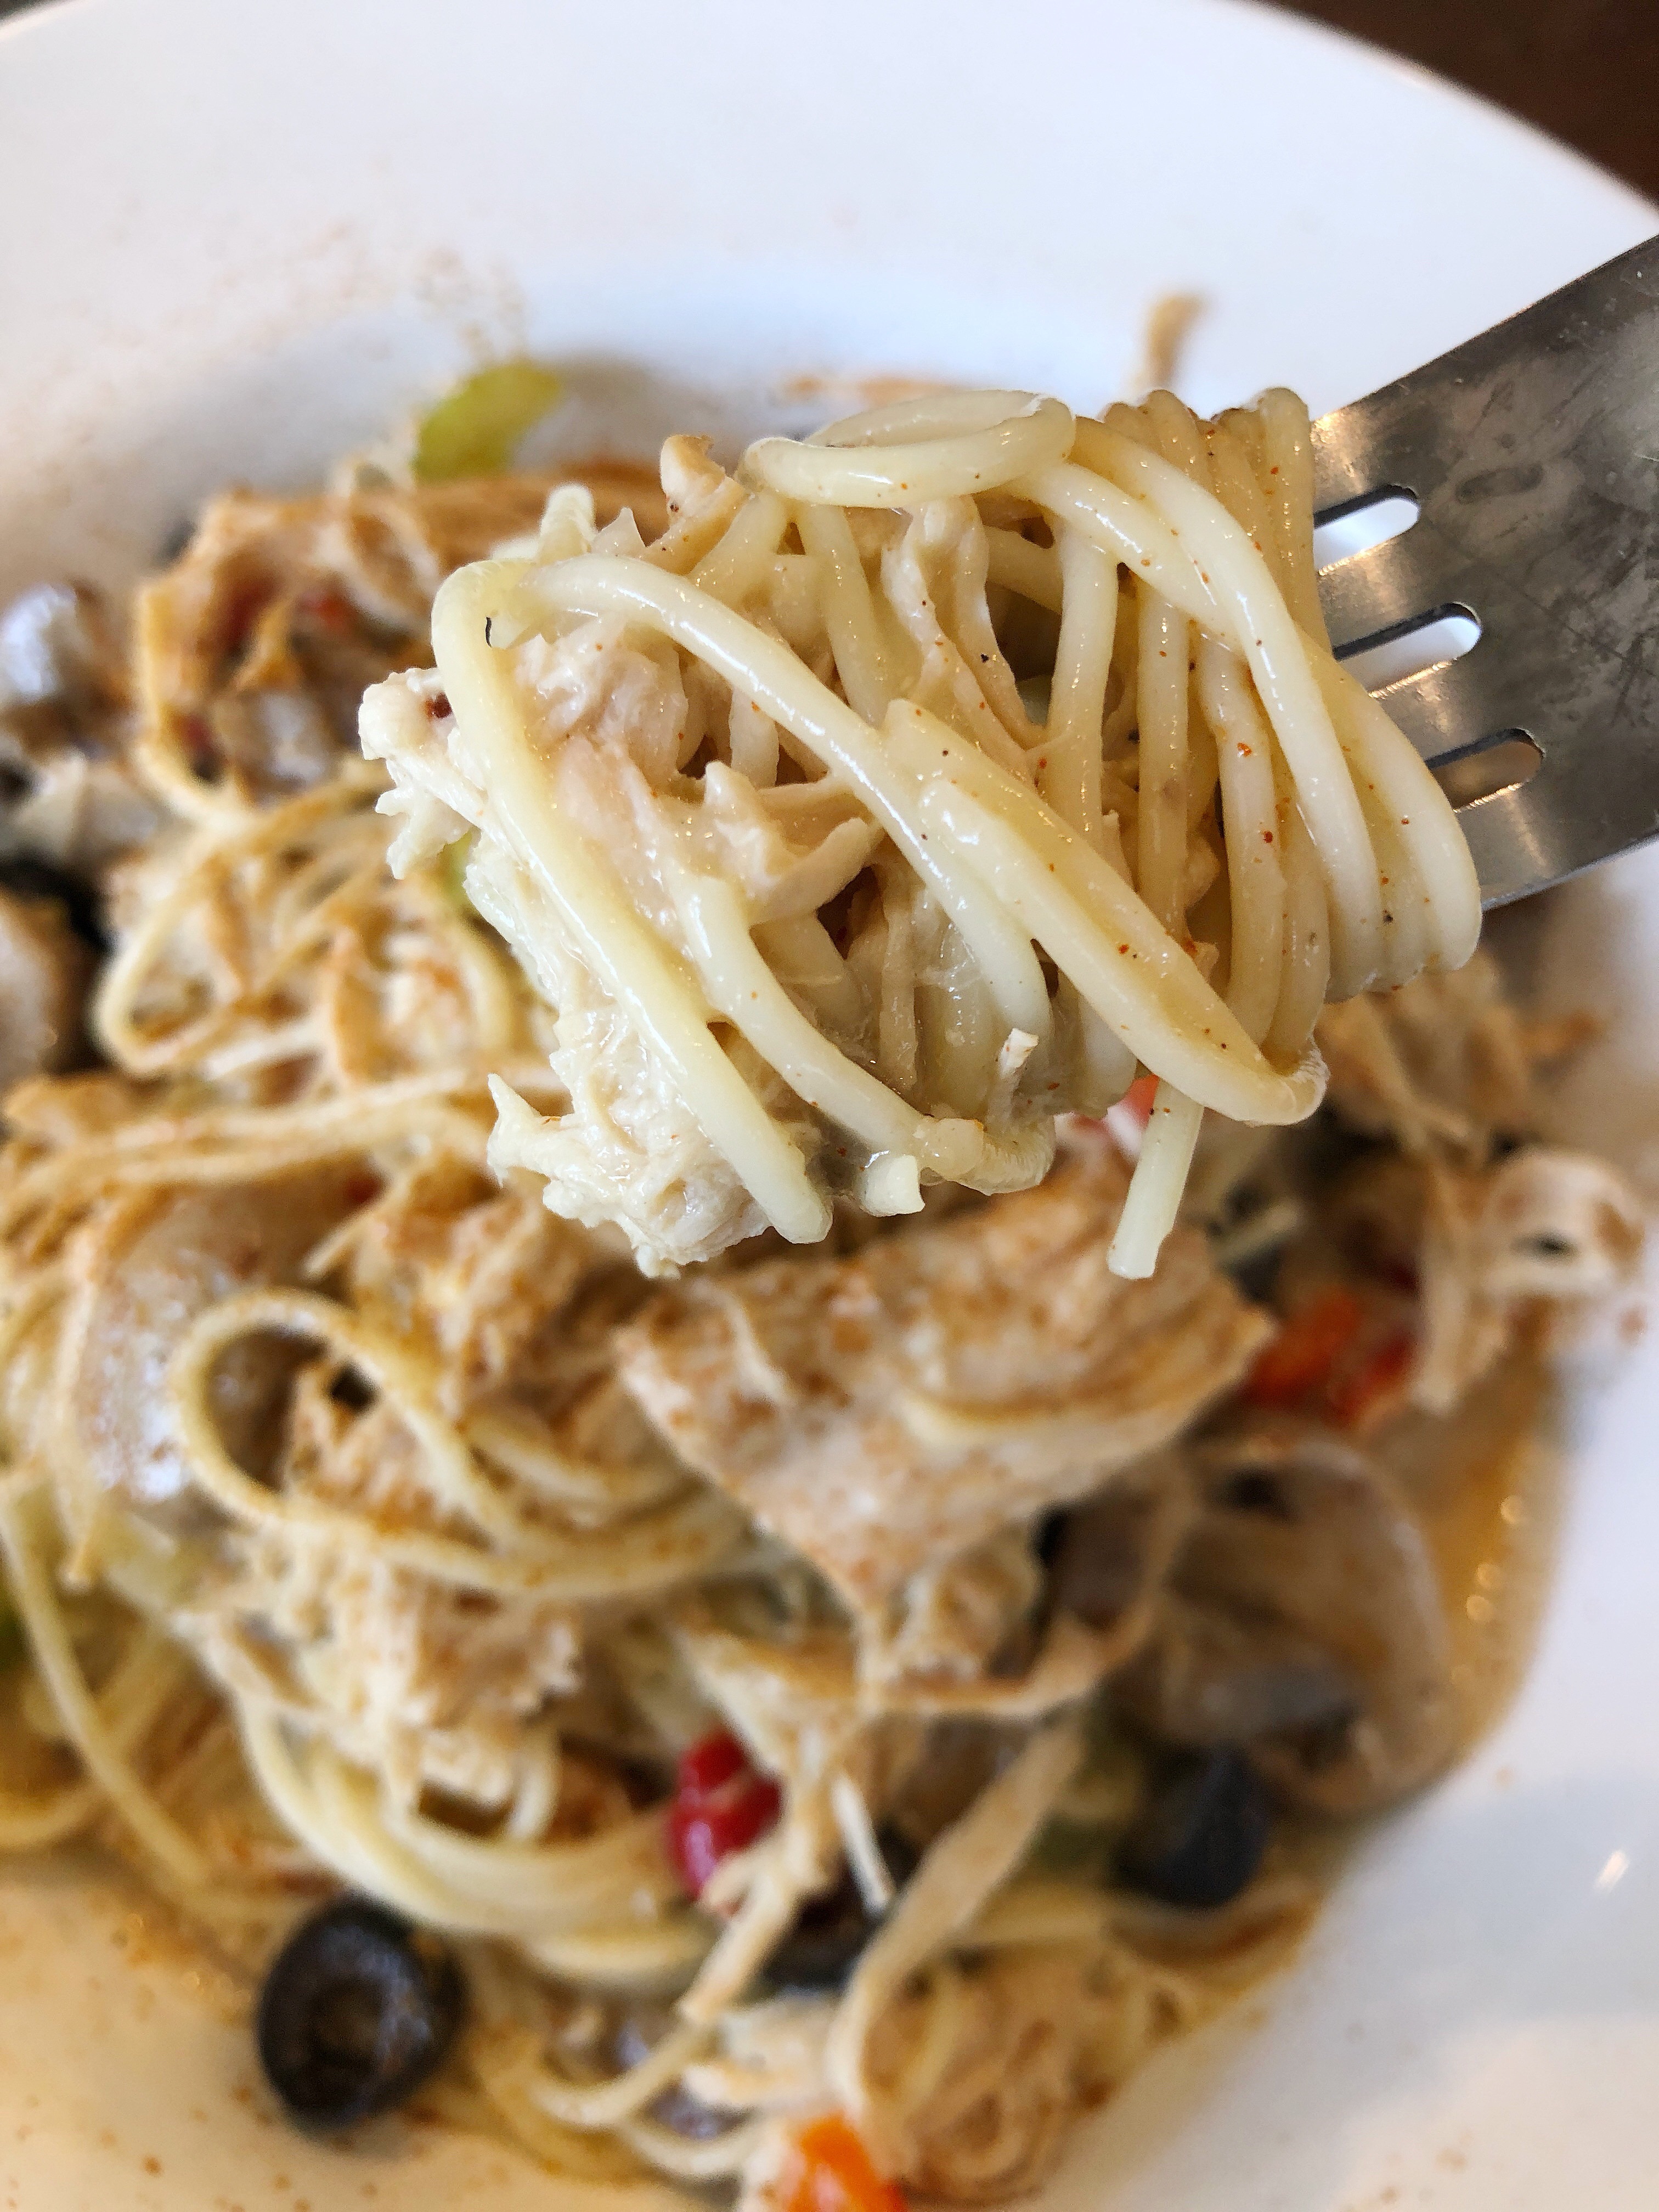 Chicken Spaghetti Easy Dinner Recipe Staples Made It Ate It Loved It